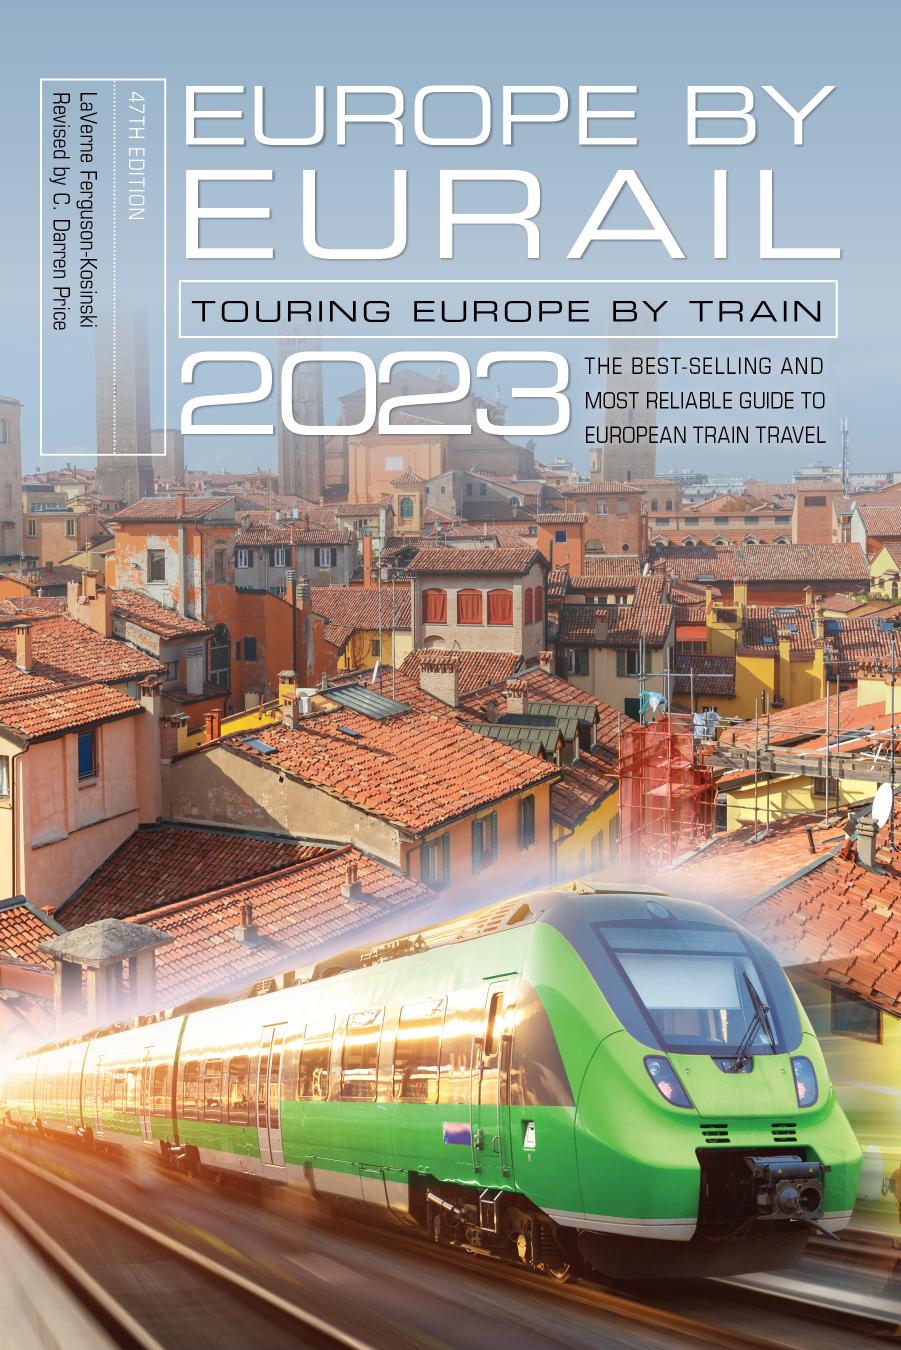 multi country european train tour packages 2023